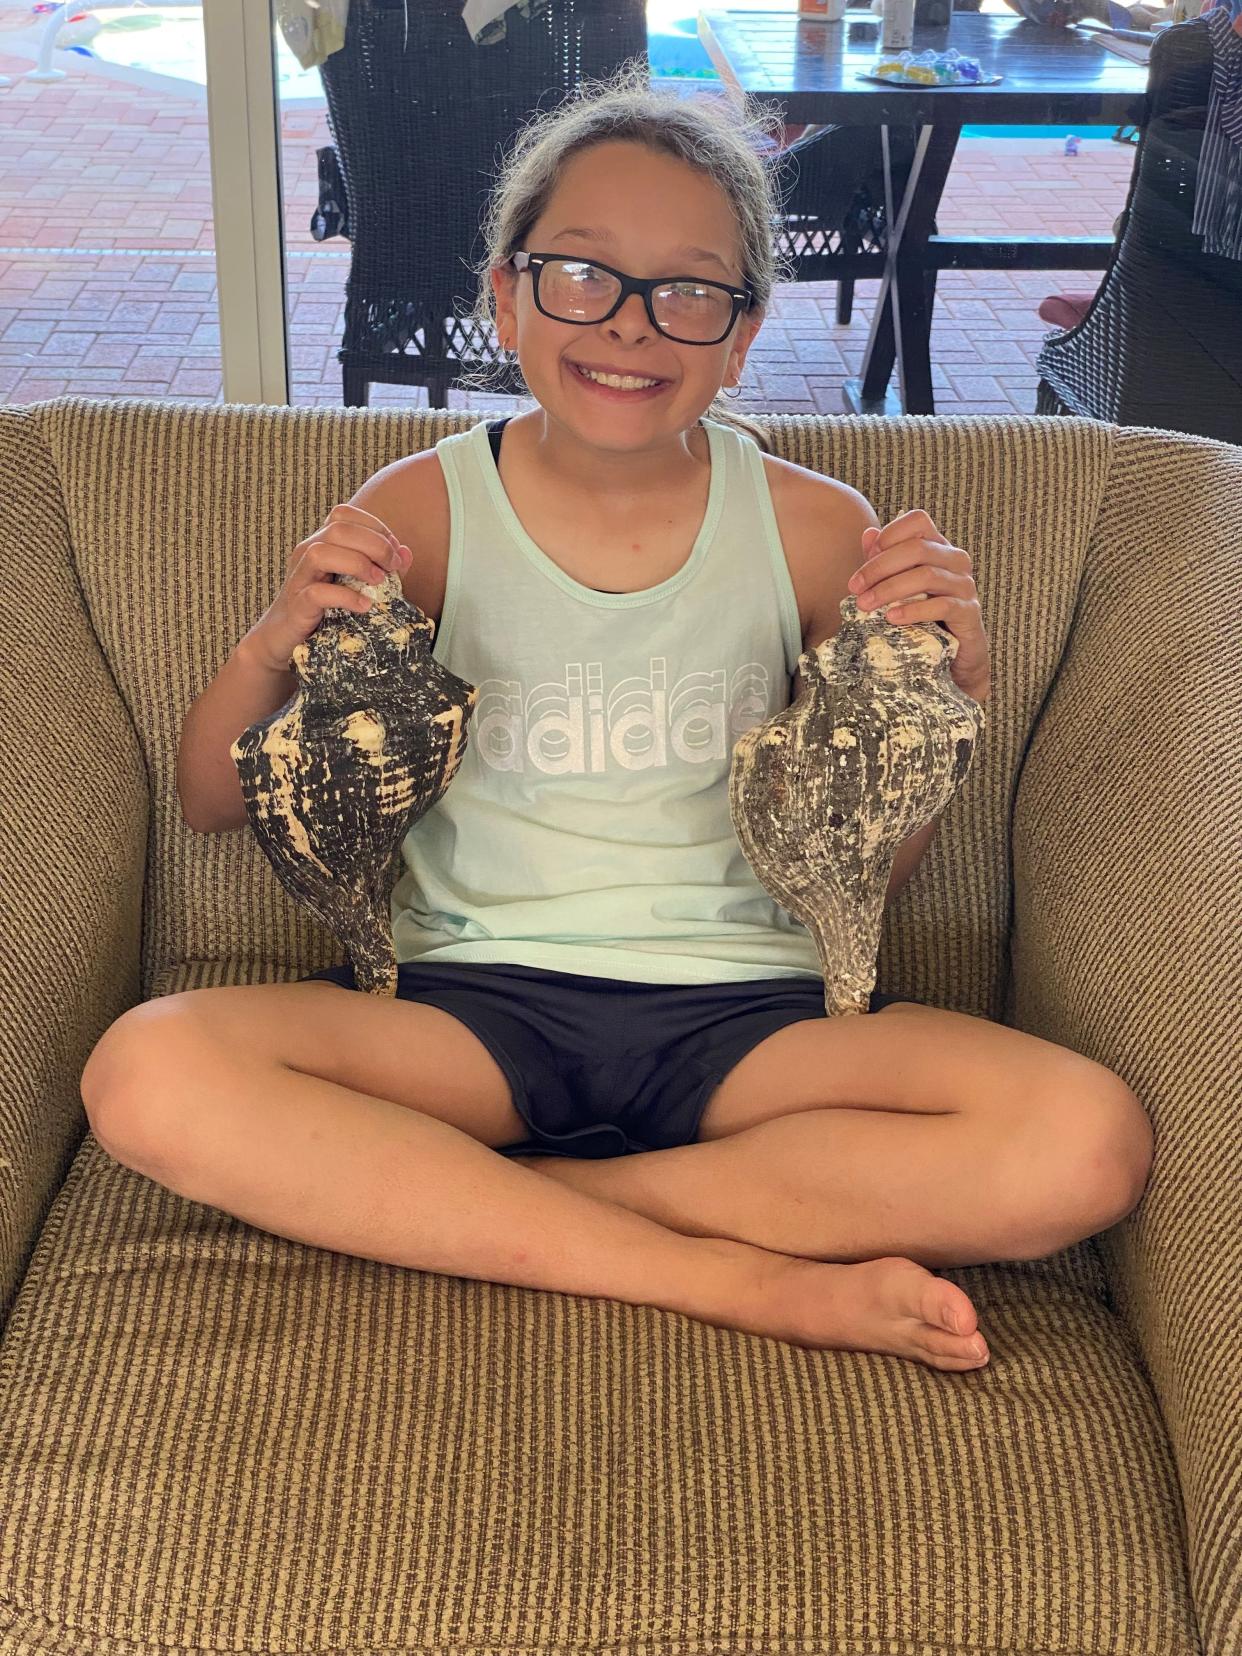 Jessica Reyna's daughter, Delaney Kain, holds the two shells the family found on a recent visit to Sanibel Island.